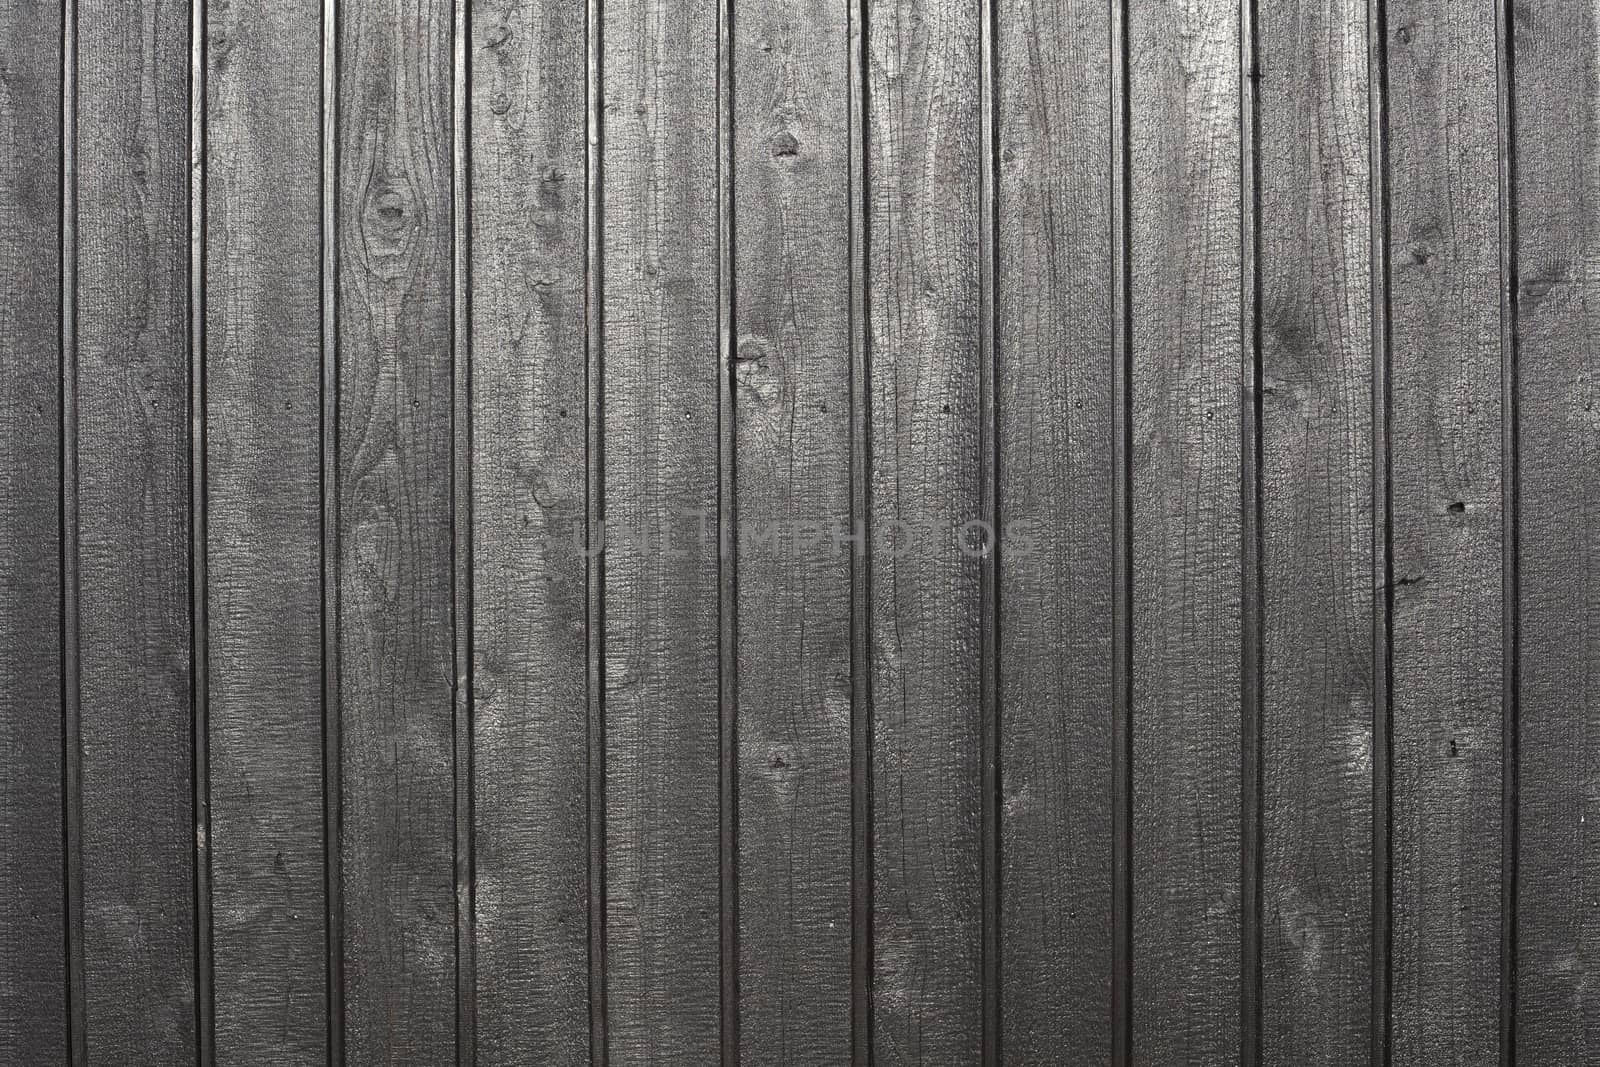 Brown raw rustic shabby wood background texture - Image